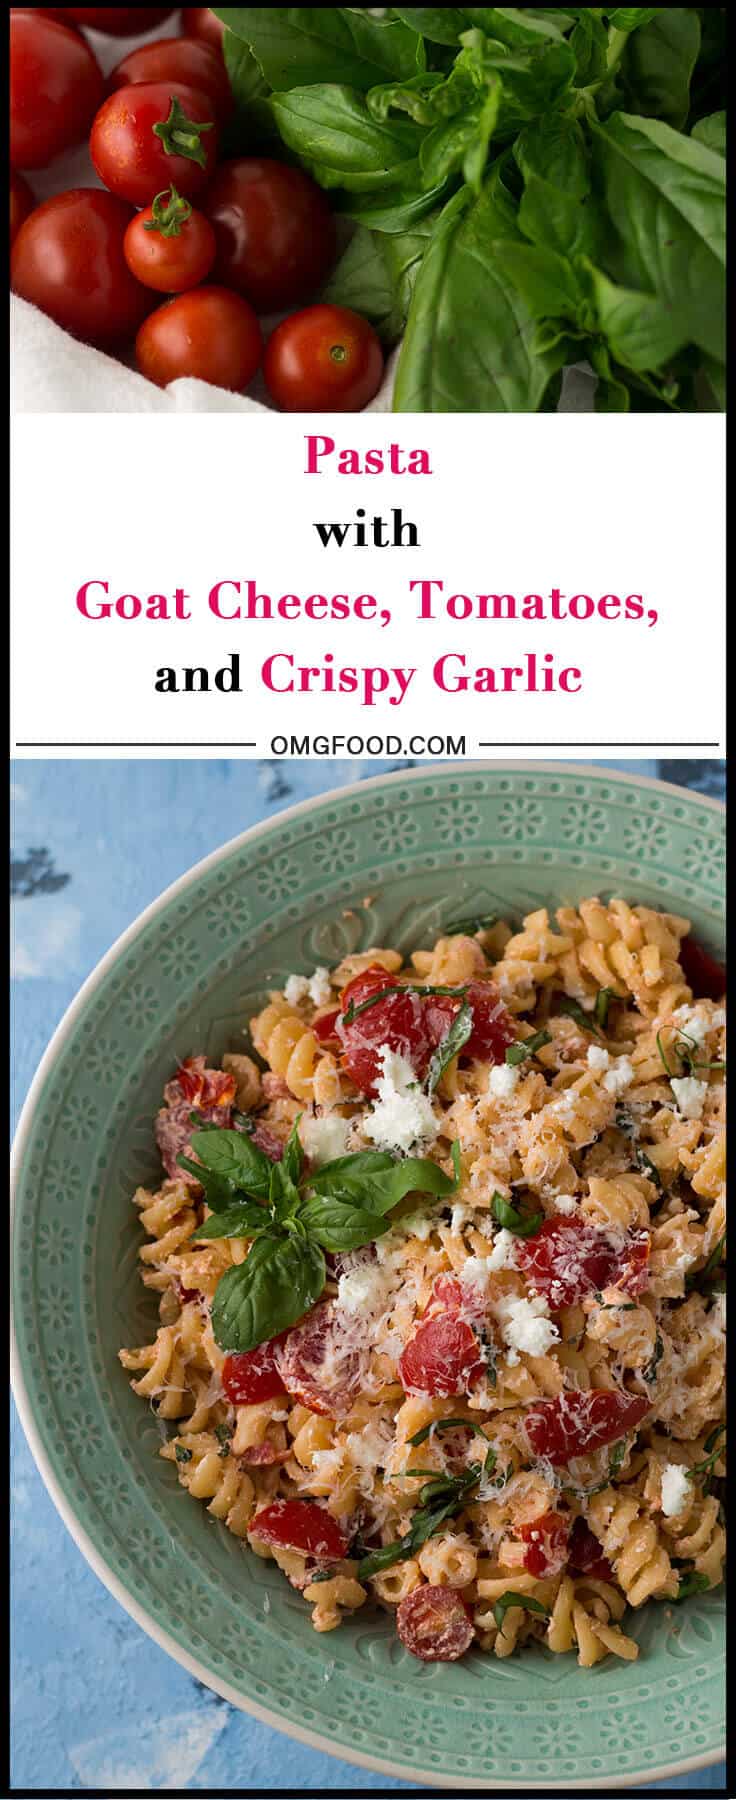 Pasta with Goat Cheese, Tomatoes, and Crispy Garlic | omgfood.com